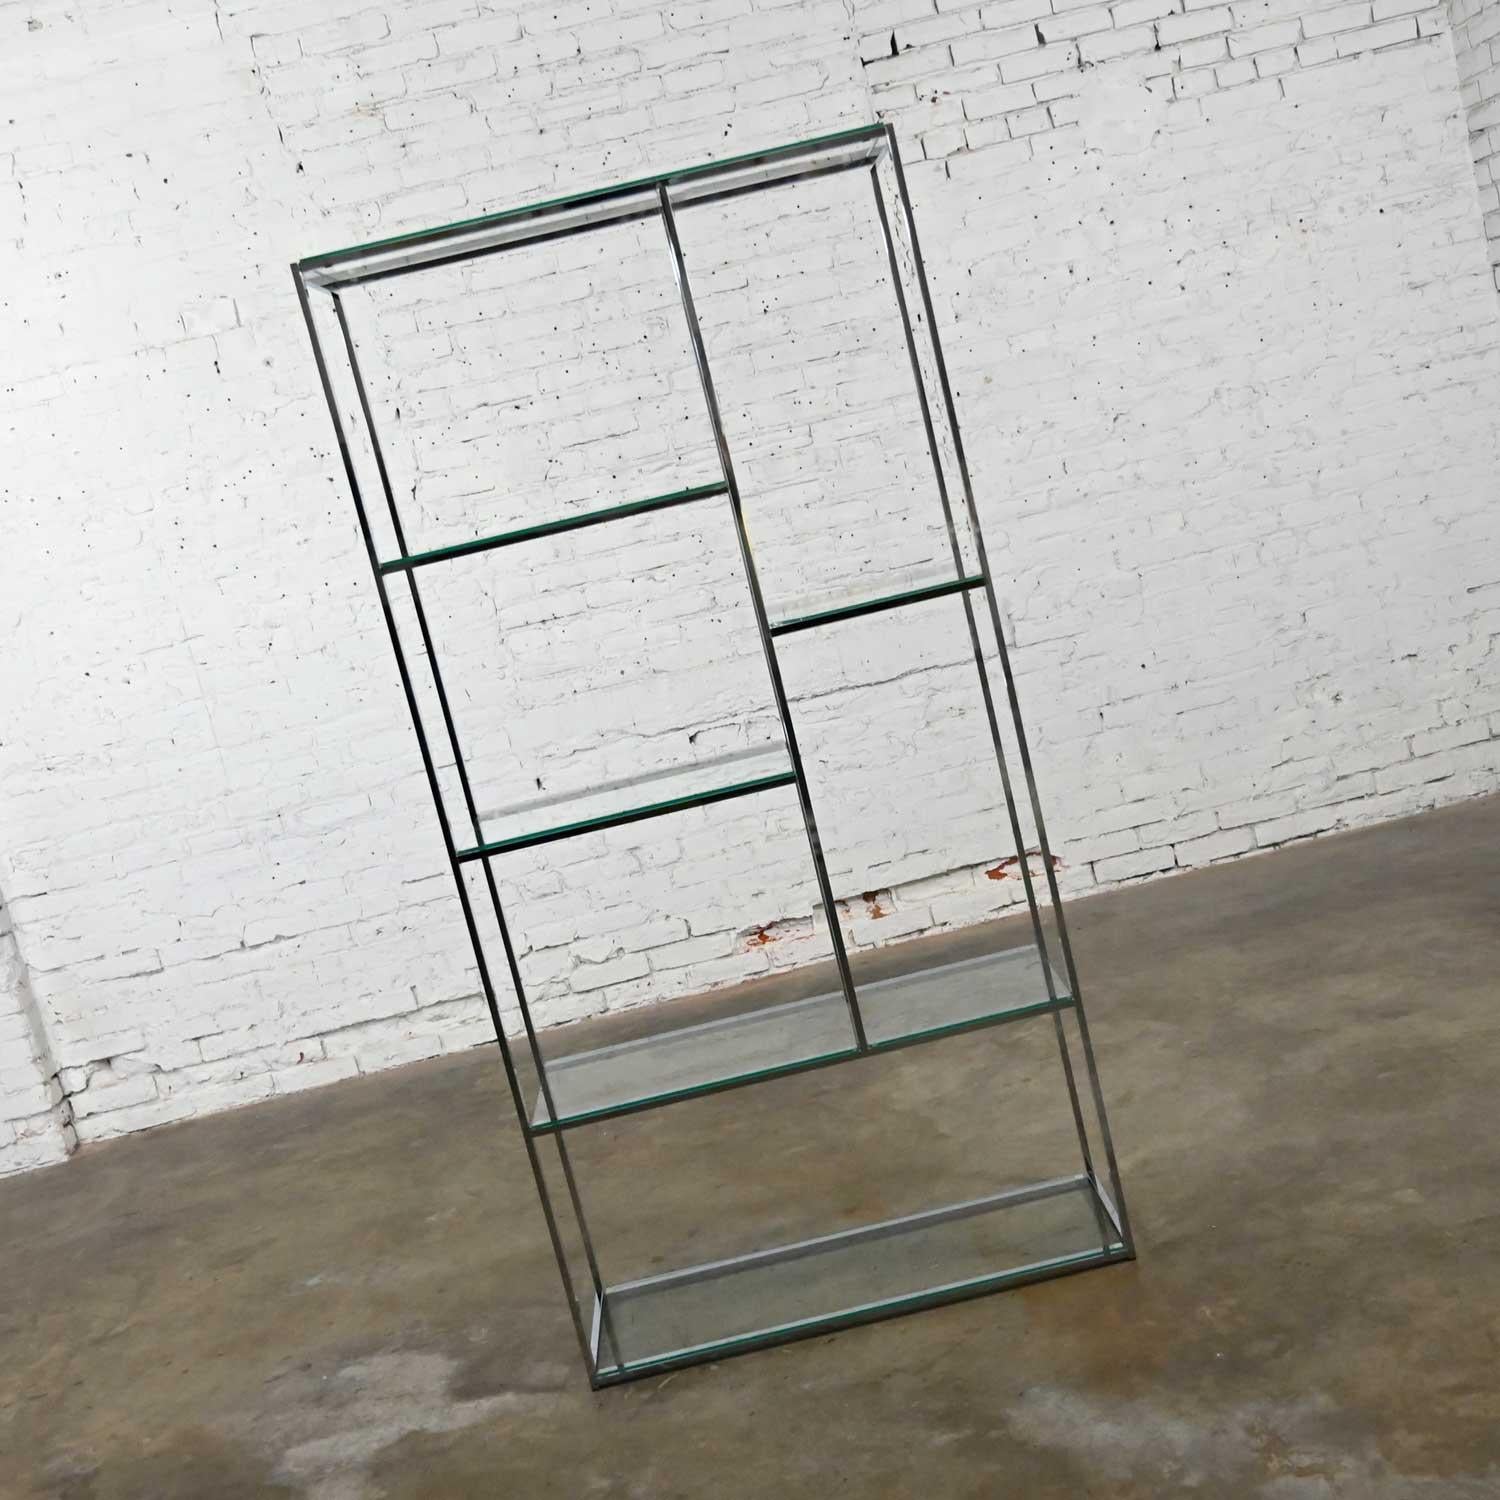 Mid-Century Modern Chrome & Glass Etagere Mondrian Style Shelf Placement In Good Condition For Sale In Topeka, KS